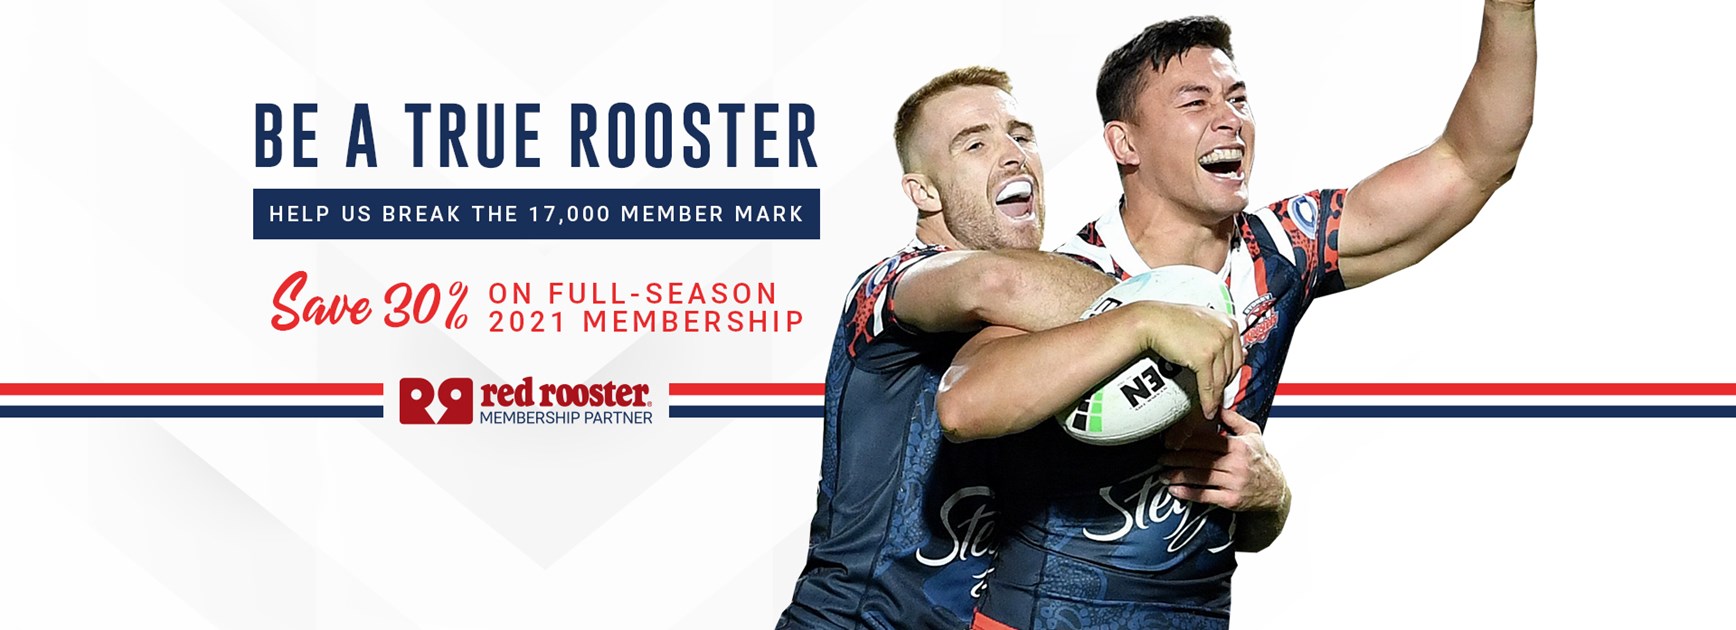 Become a True Rooster for the Remainder of 2021 with this Offer!